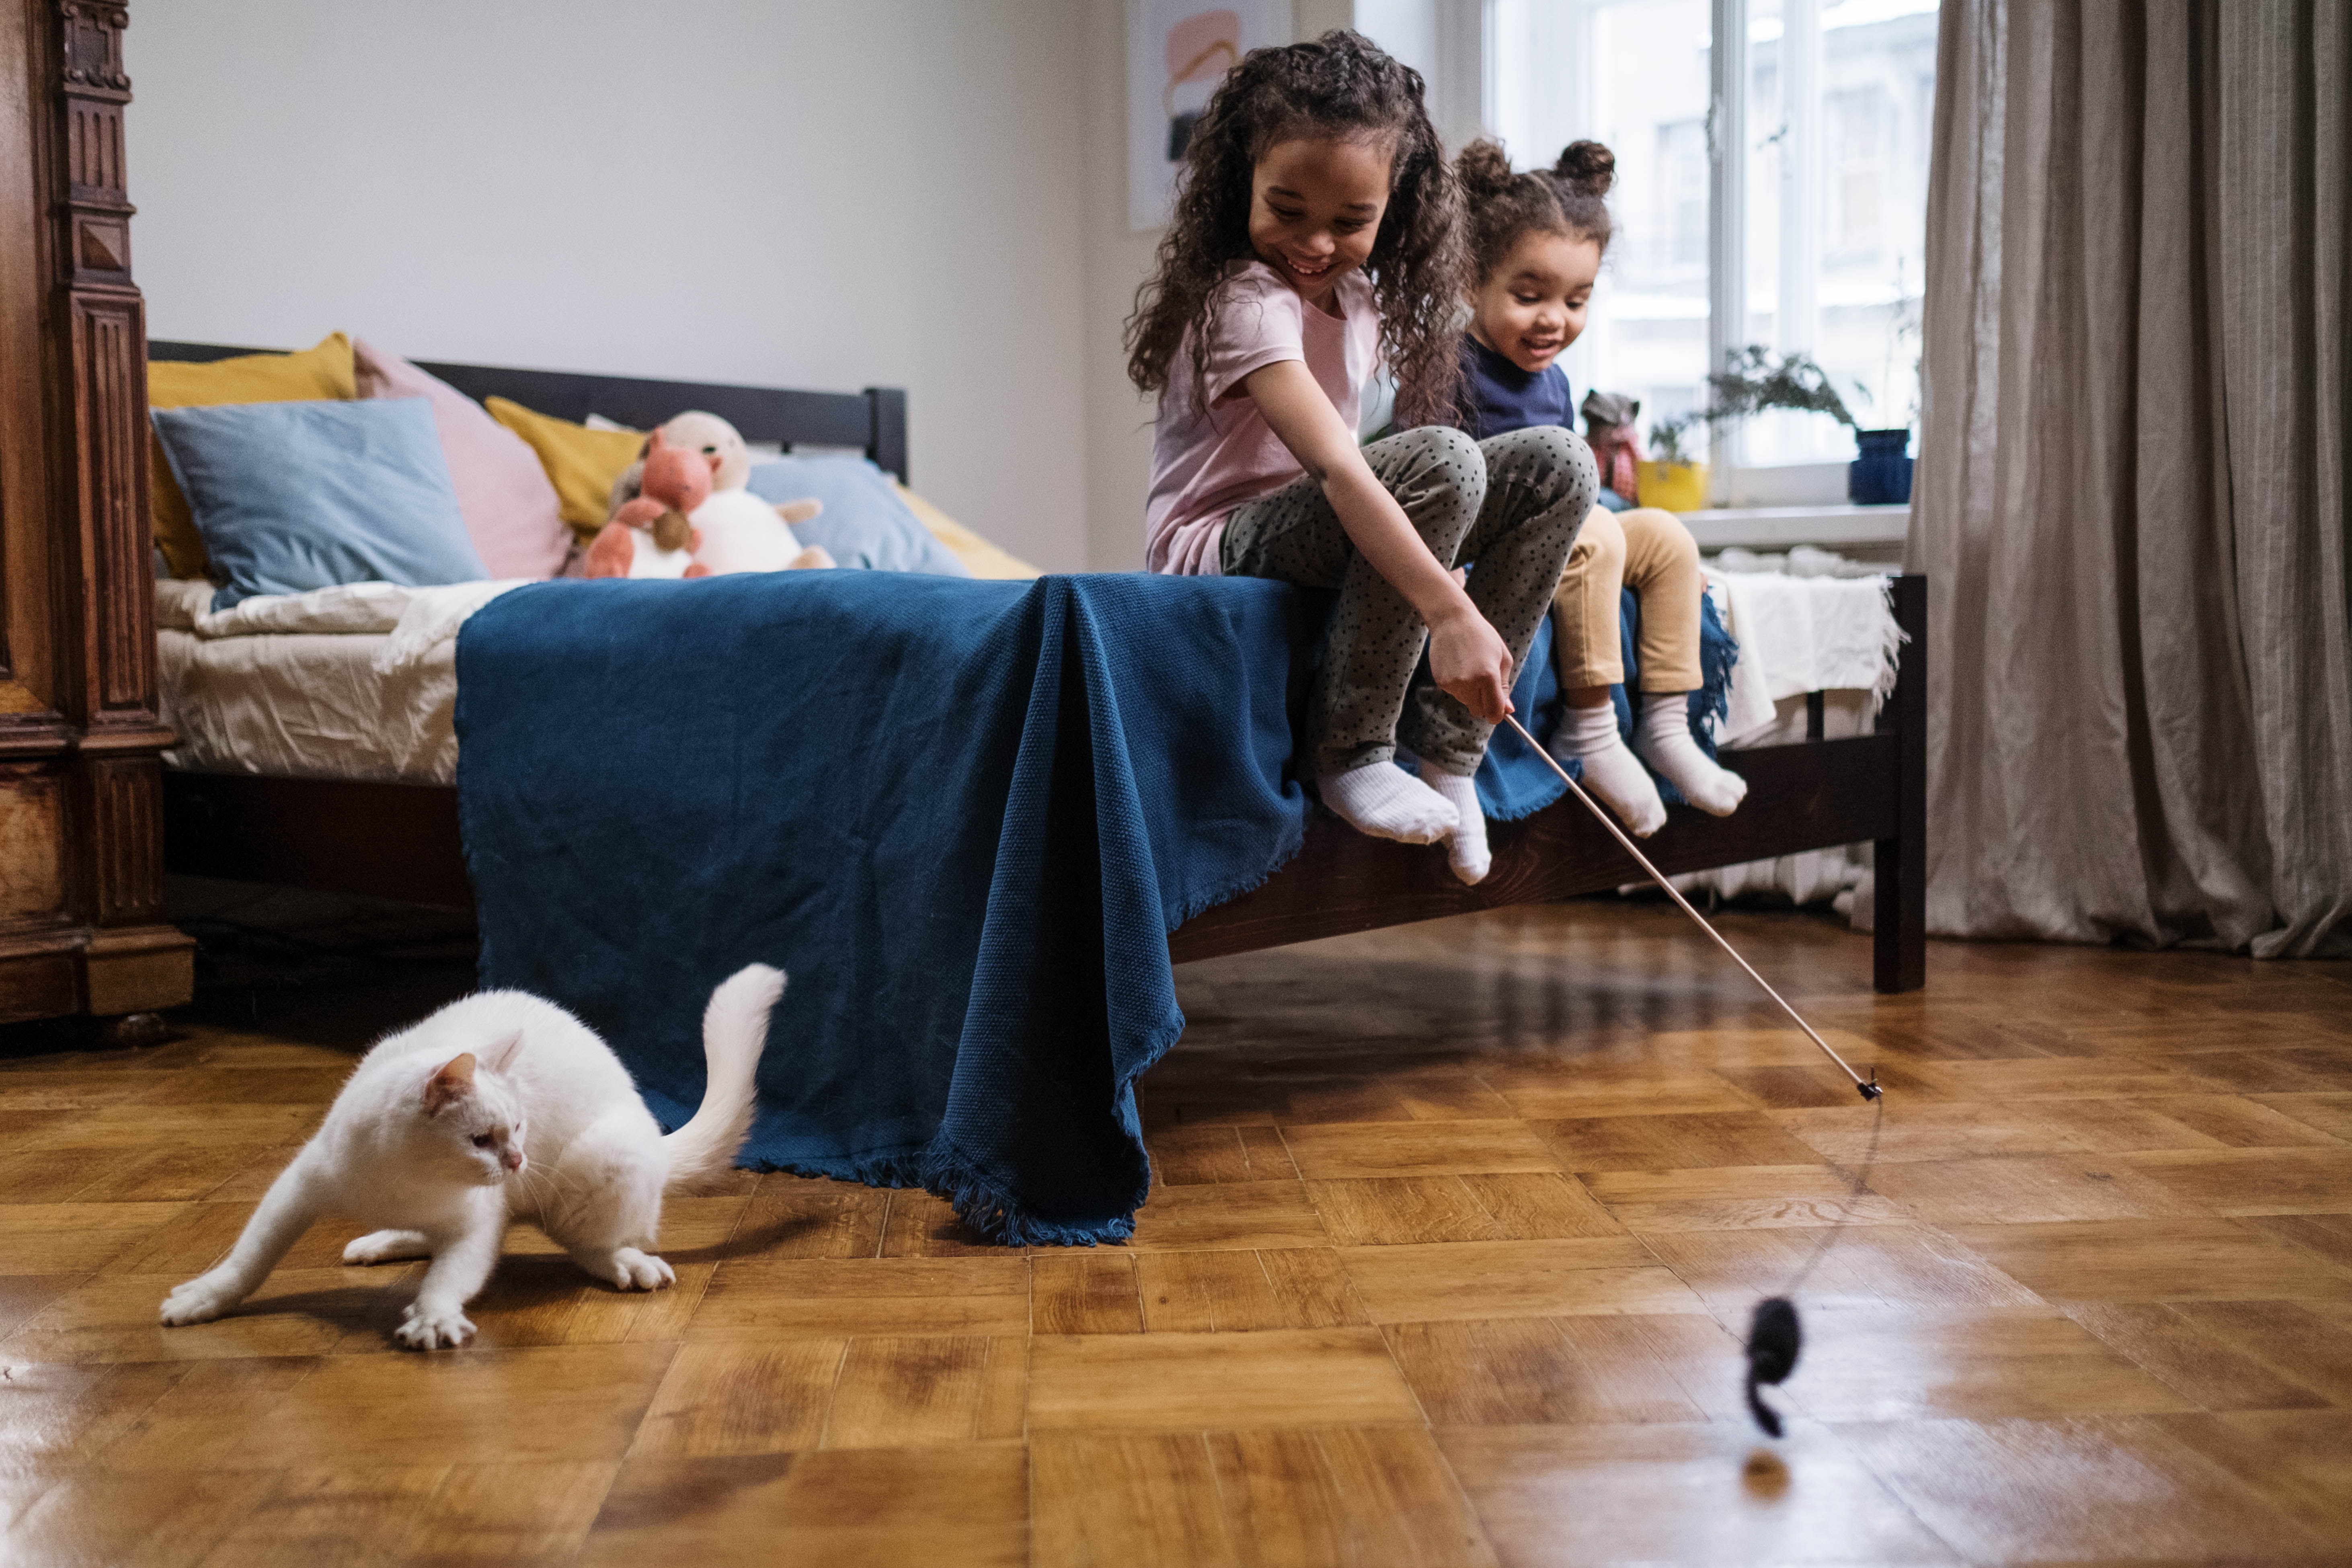 Children play a hunting game with a cat in a bedroom